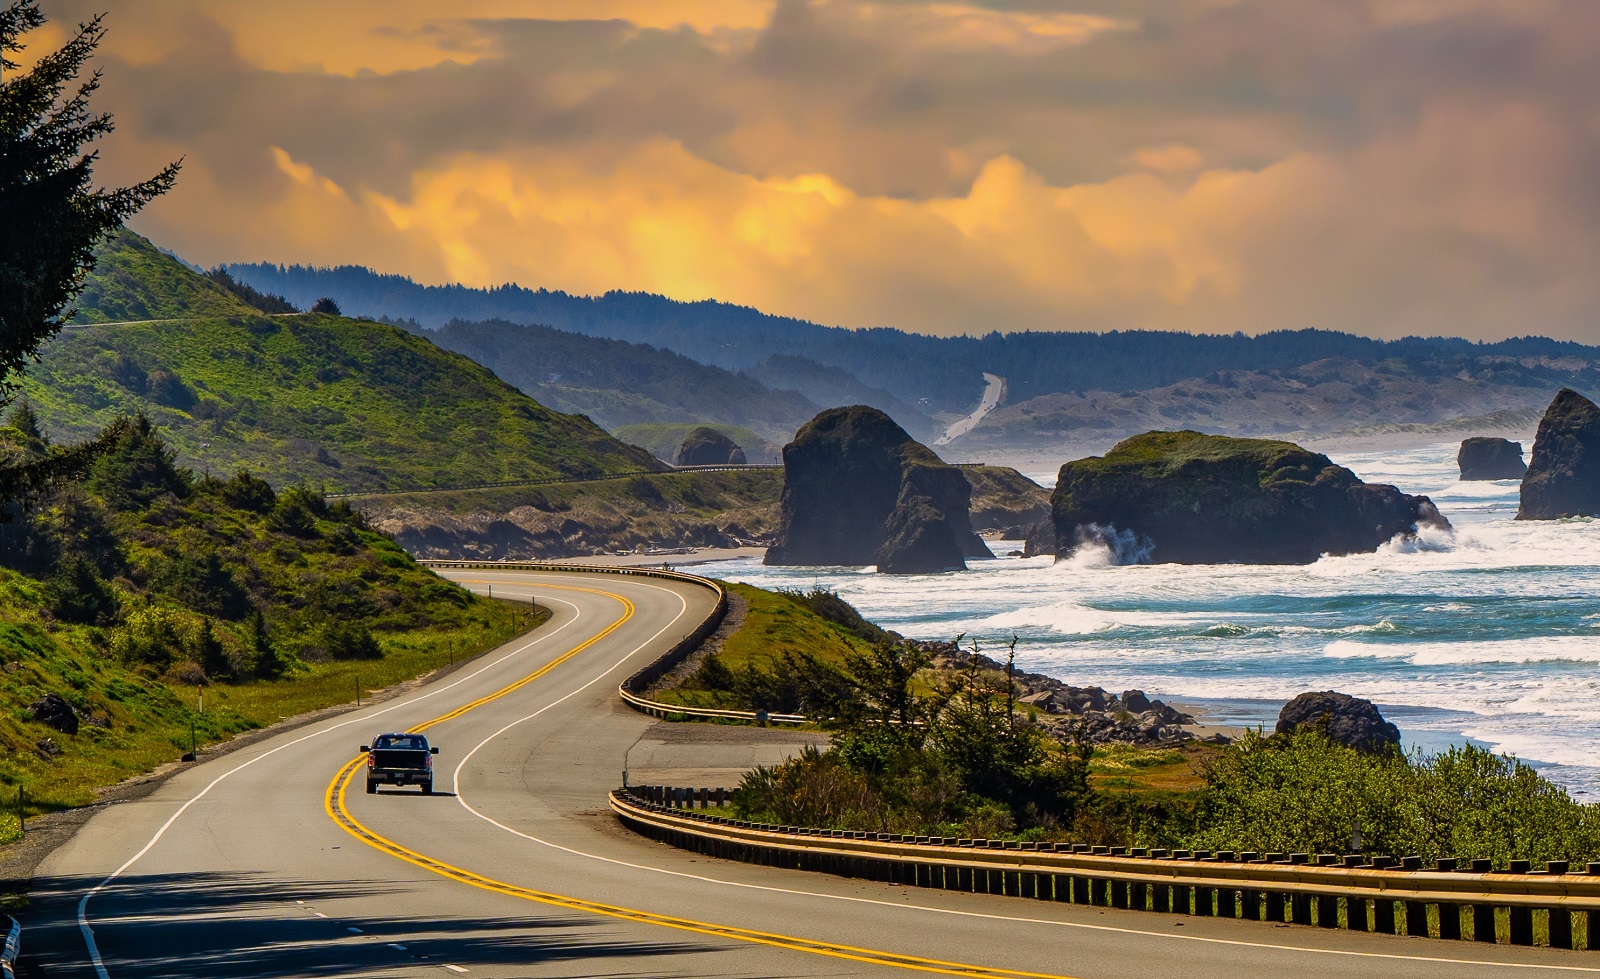 <p class="wp-caption-text">Image Credit: Shutterstock / Bob Pool</p>  <p><span>Embark on a journey along Highway 101 and explore the stunning coastline of Oregon. From rugged cliffs to sandy beaches, this scenic drive offers endless opportunities for adventure and exploration.</span></p>